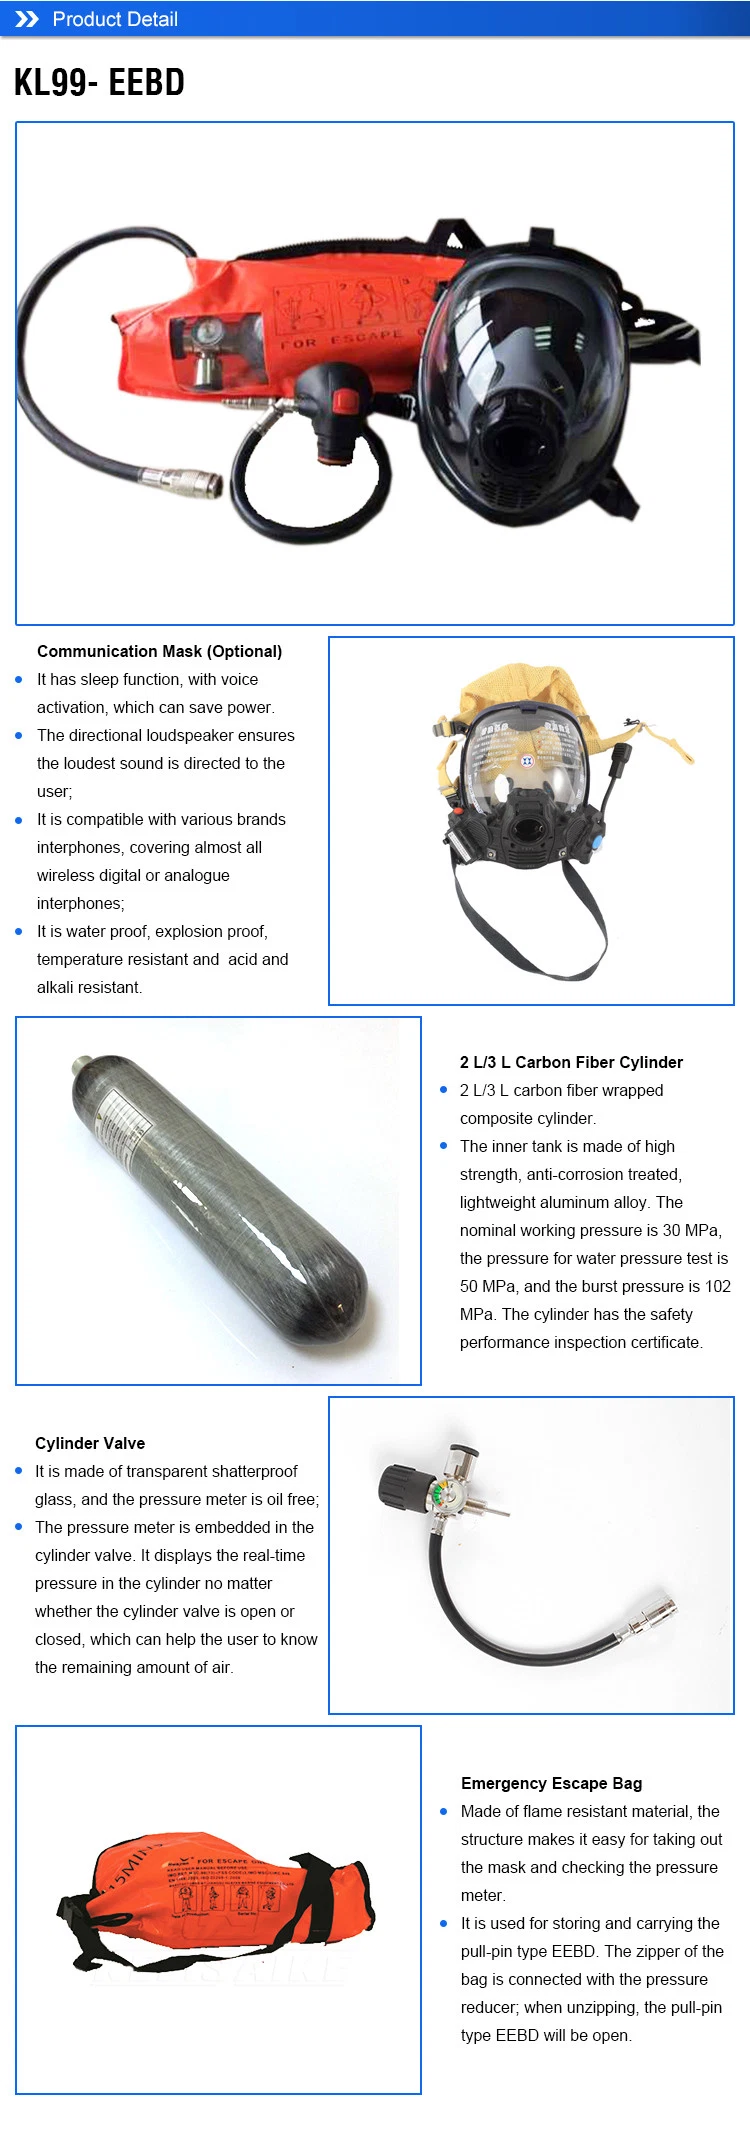 Portable Breathing Apparatus/Fire Escape Hood with Carbon Fiber Cylinder/Eebd/Emergency Air Respirator